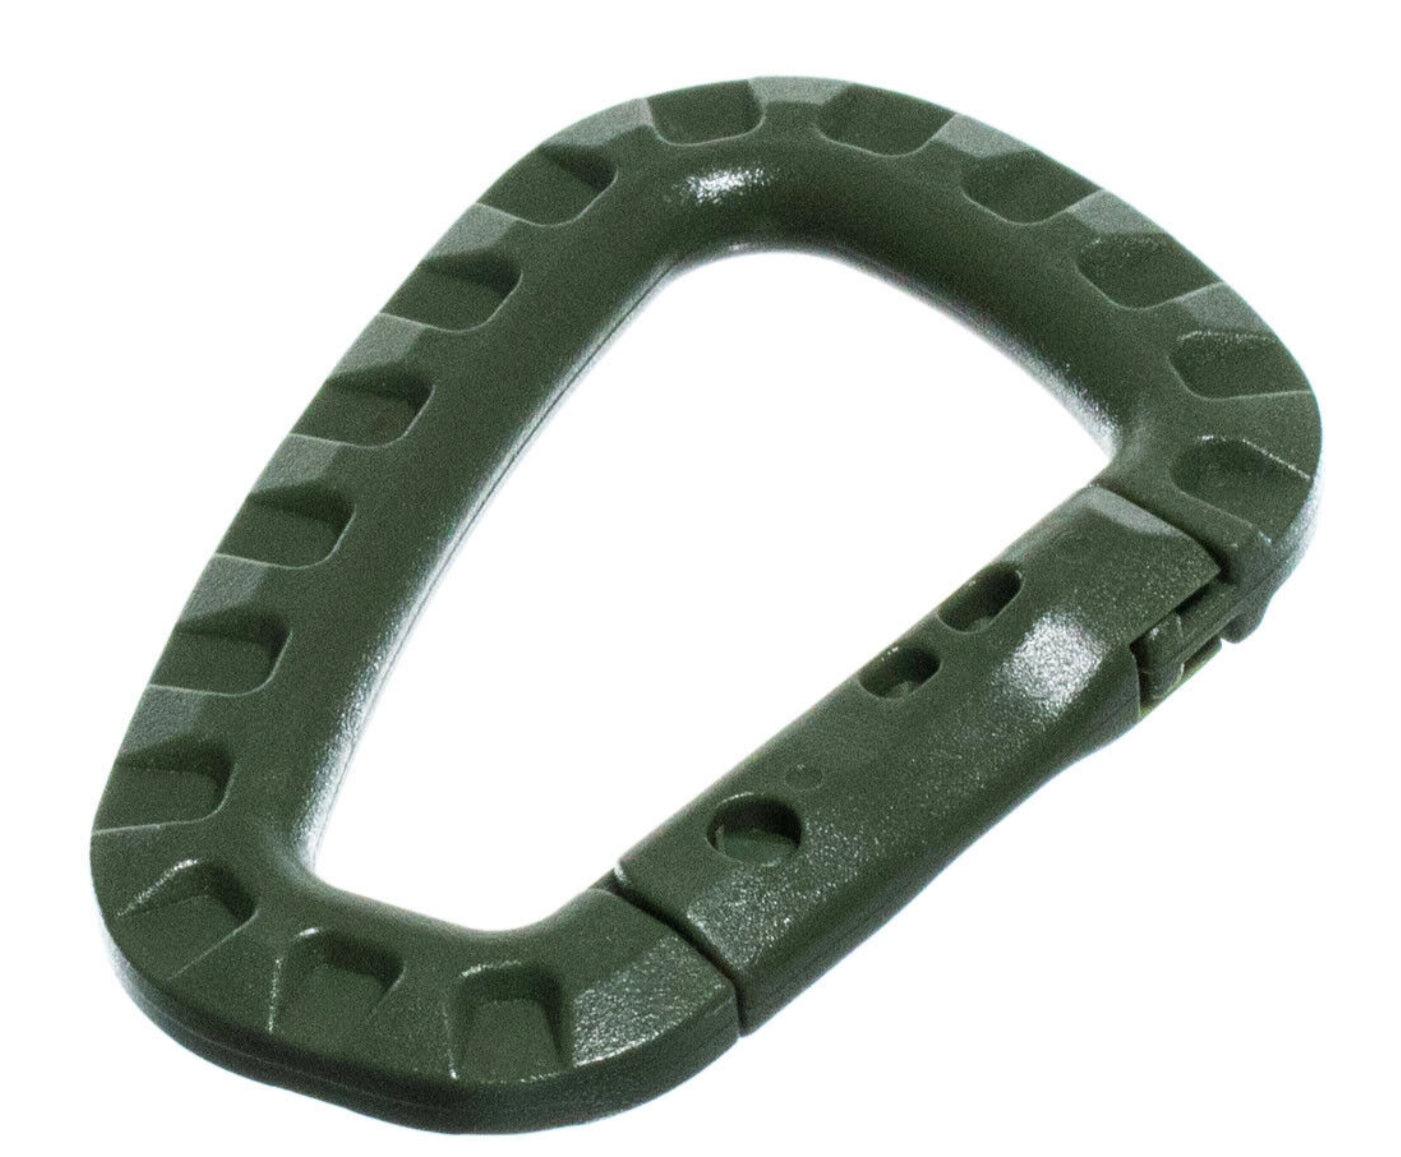 Tactical D-ring Carabiners Strong Molded Polymer Carabiner - Badger Survival 